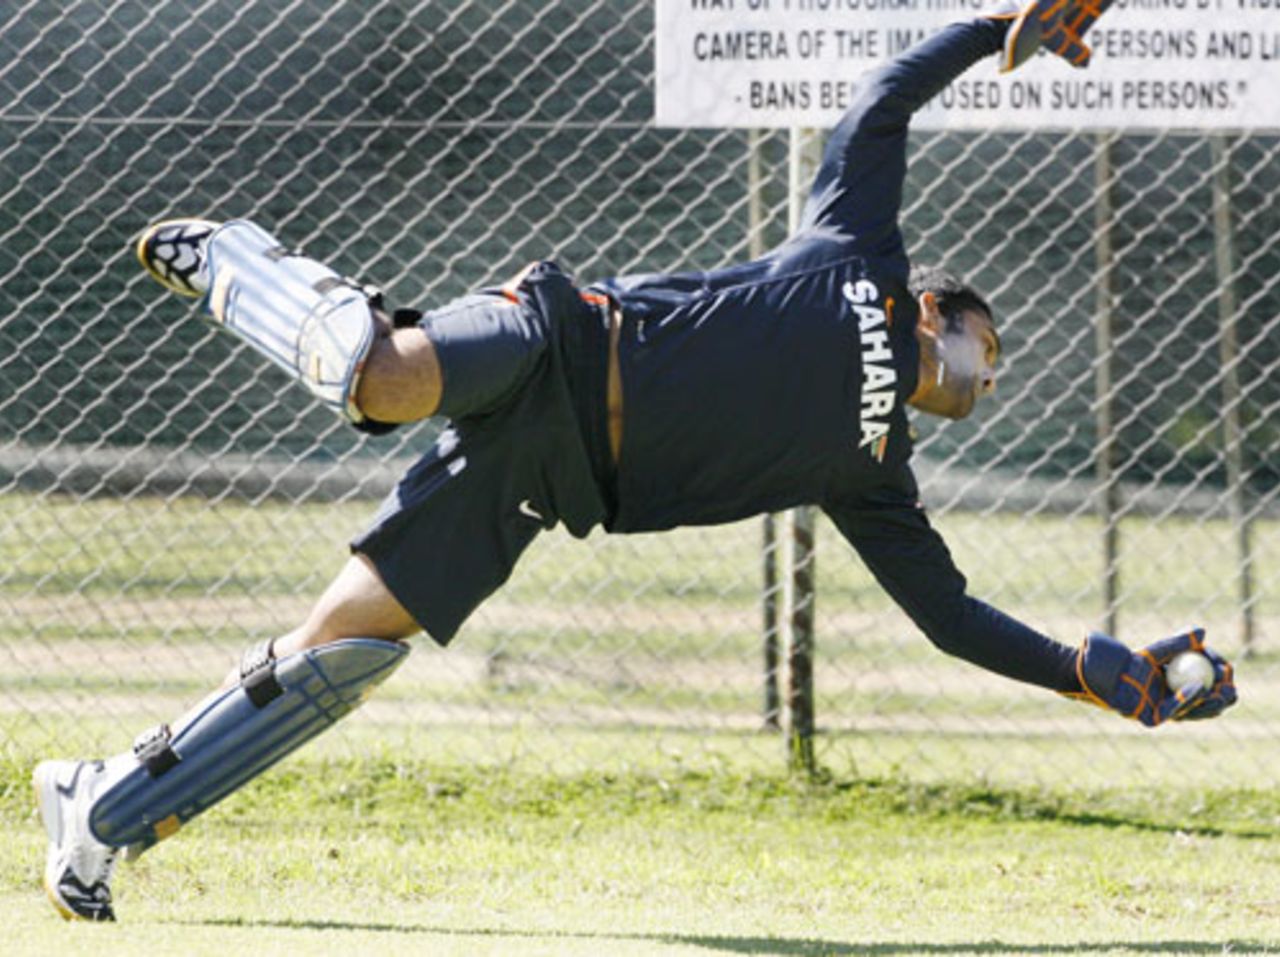 Dinesh Karthik dives to pouch a catch during practice, Harare, June 4, 2010